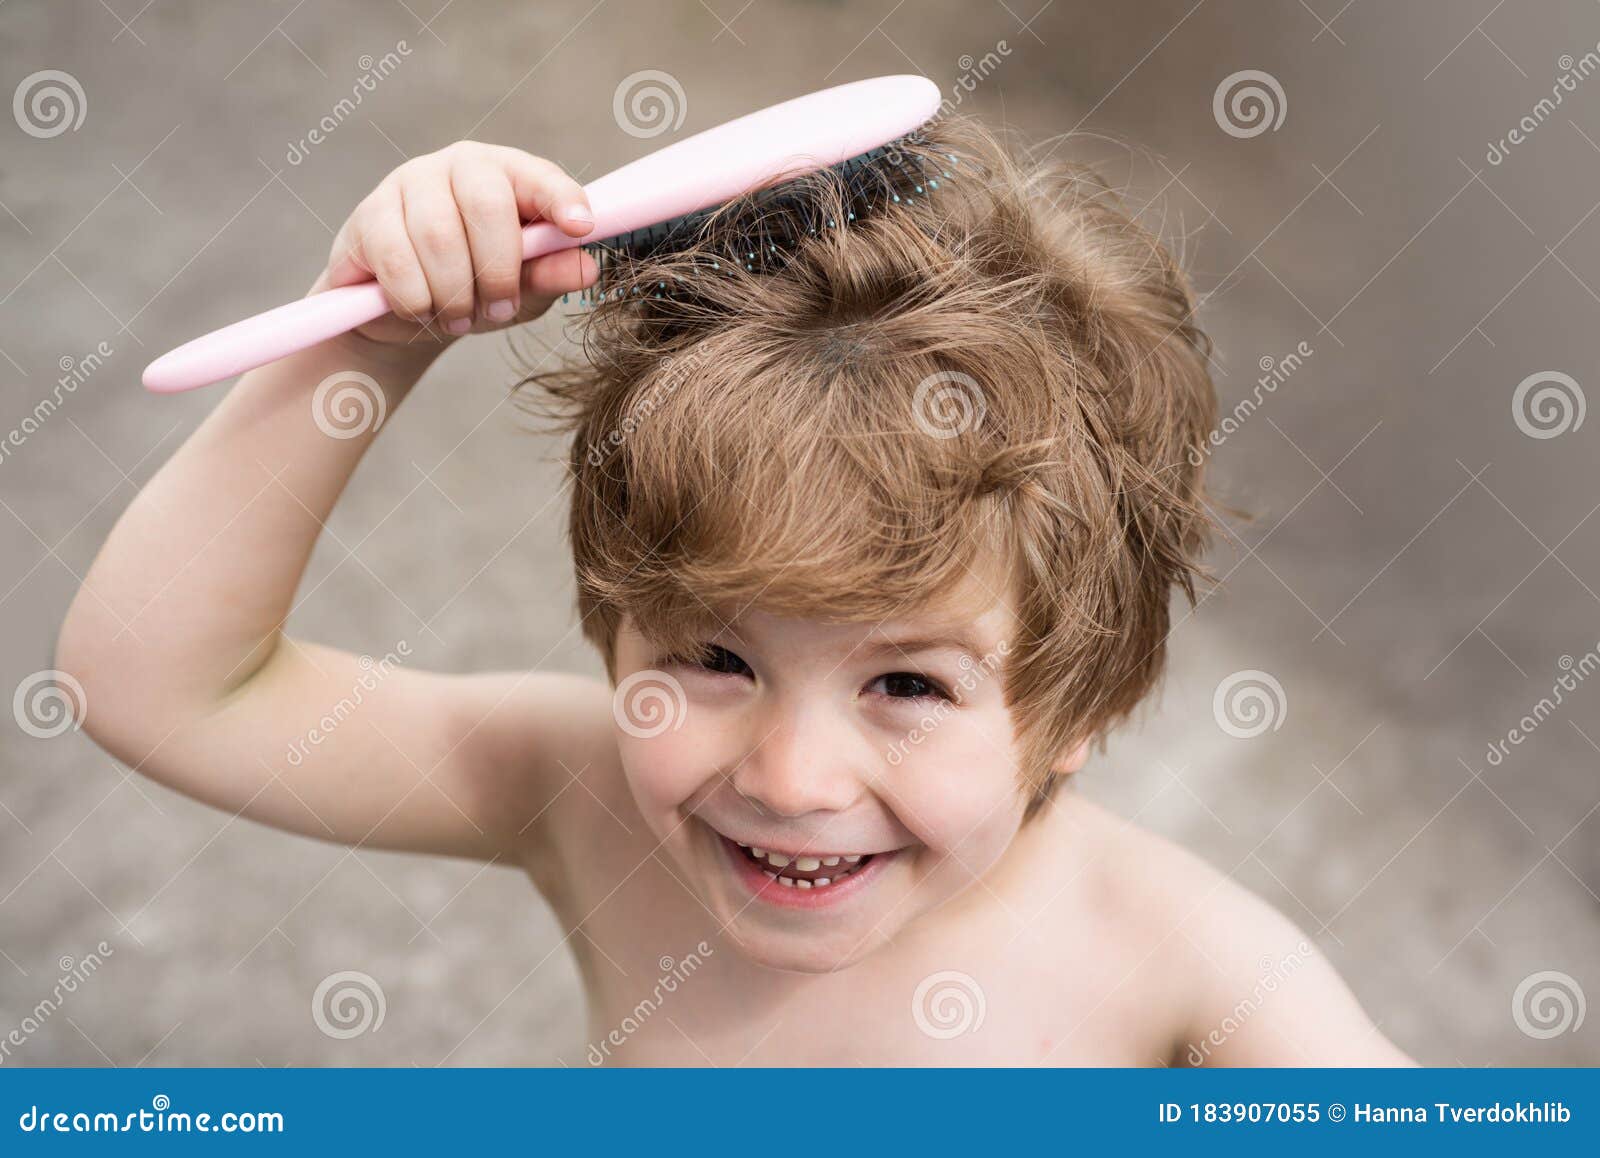 Hairstyle for Children. the Boy Knows How To Comb His Hair. Stock Image -  Image of beauty, lovely: 183907055